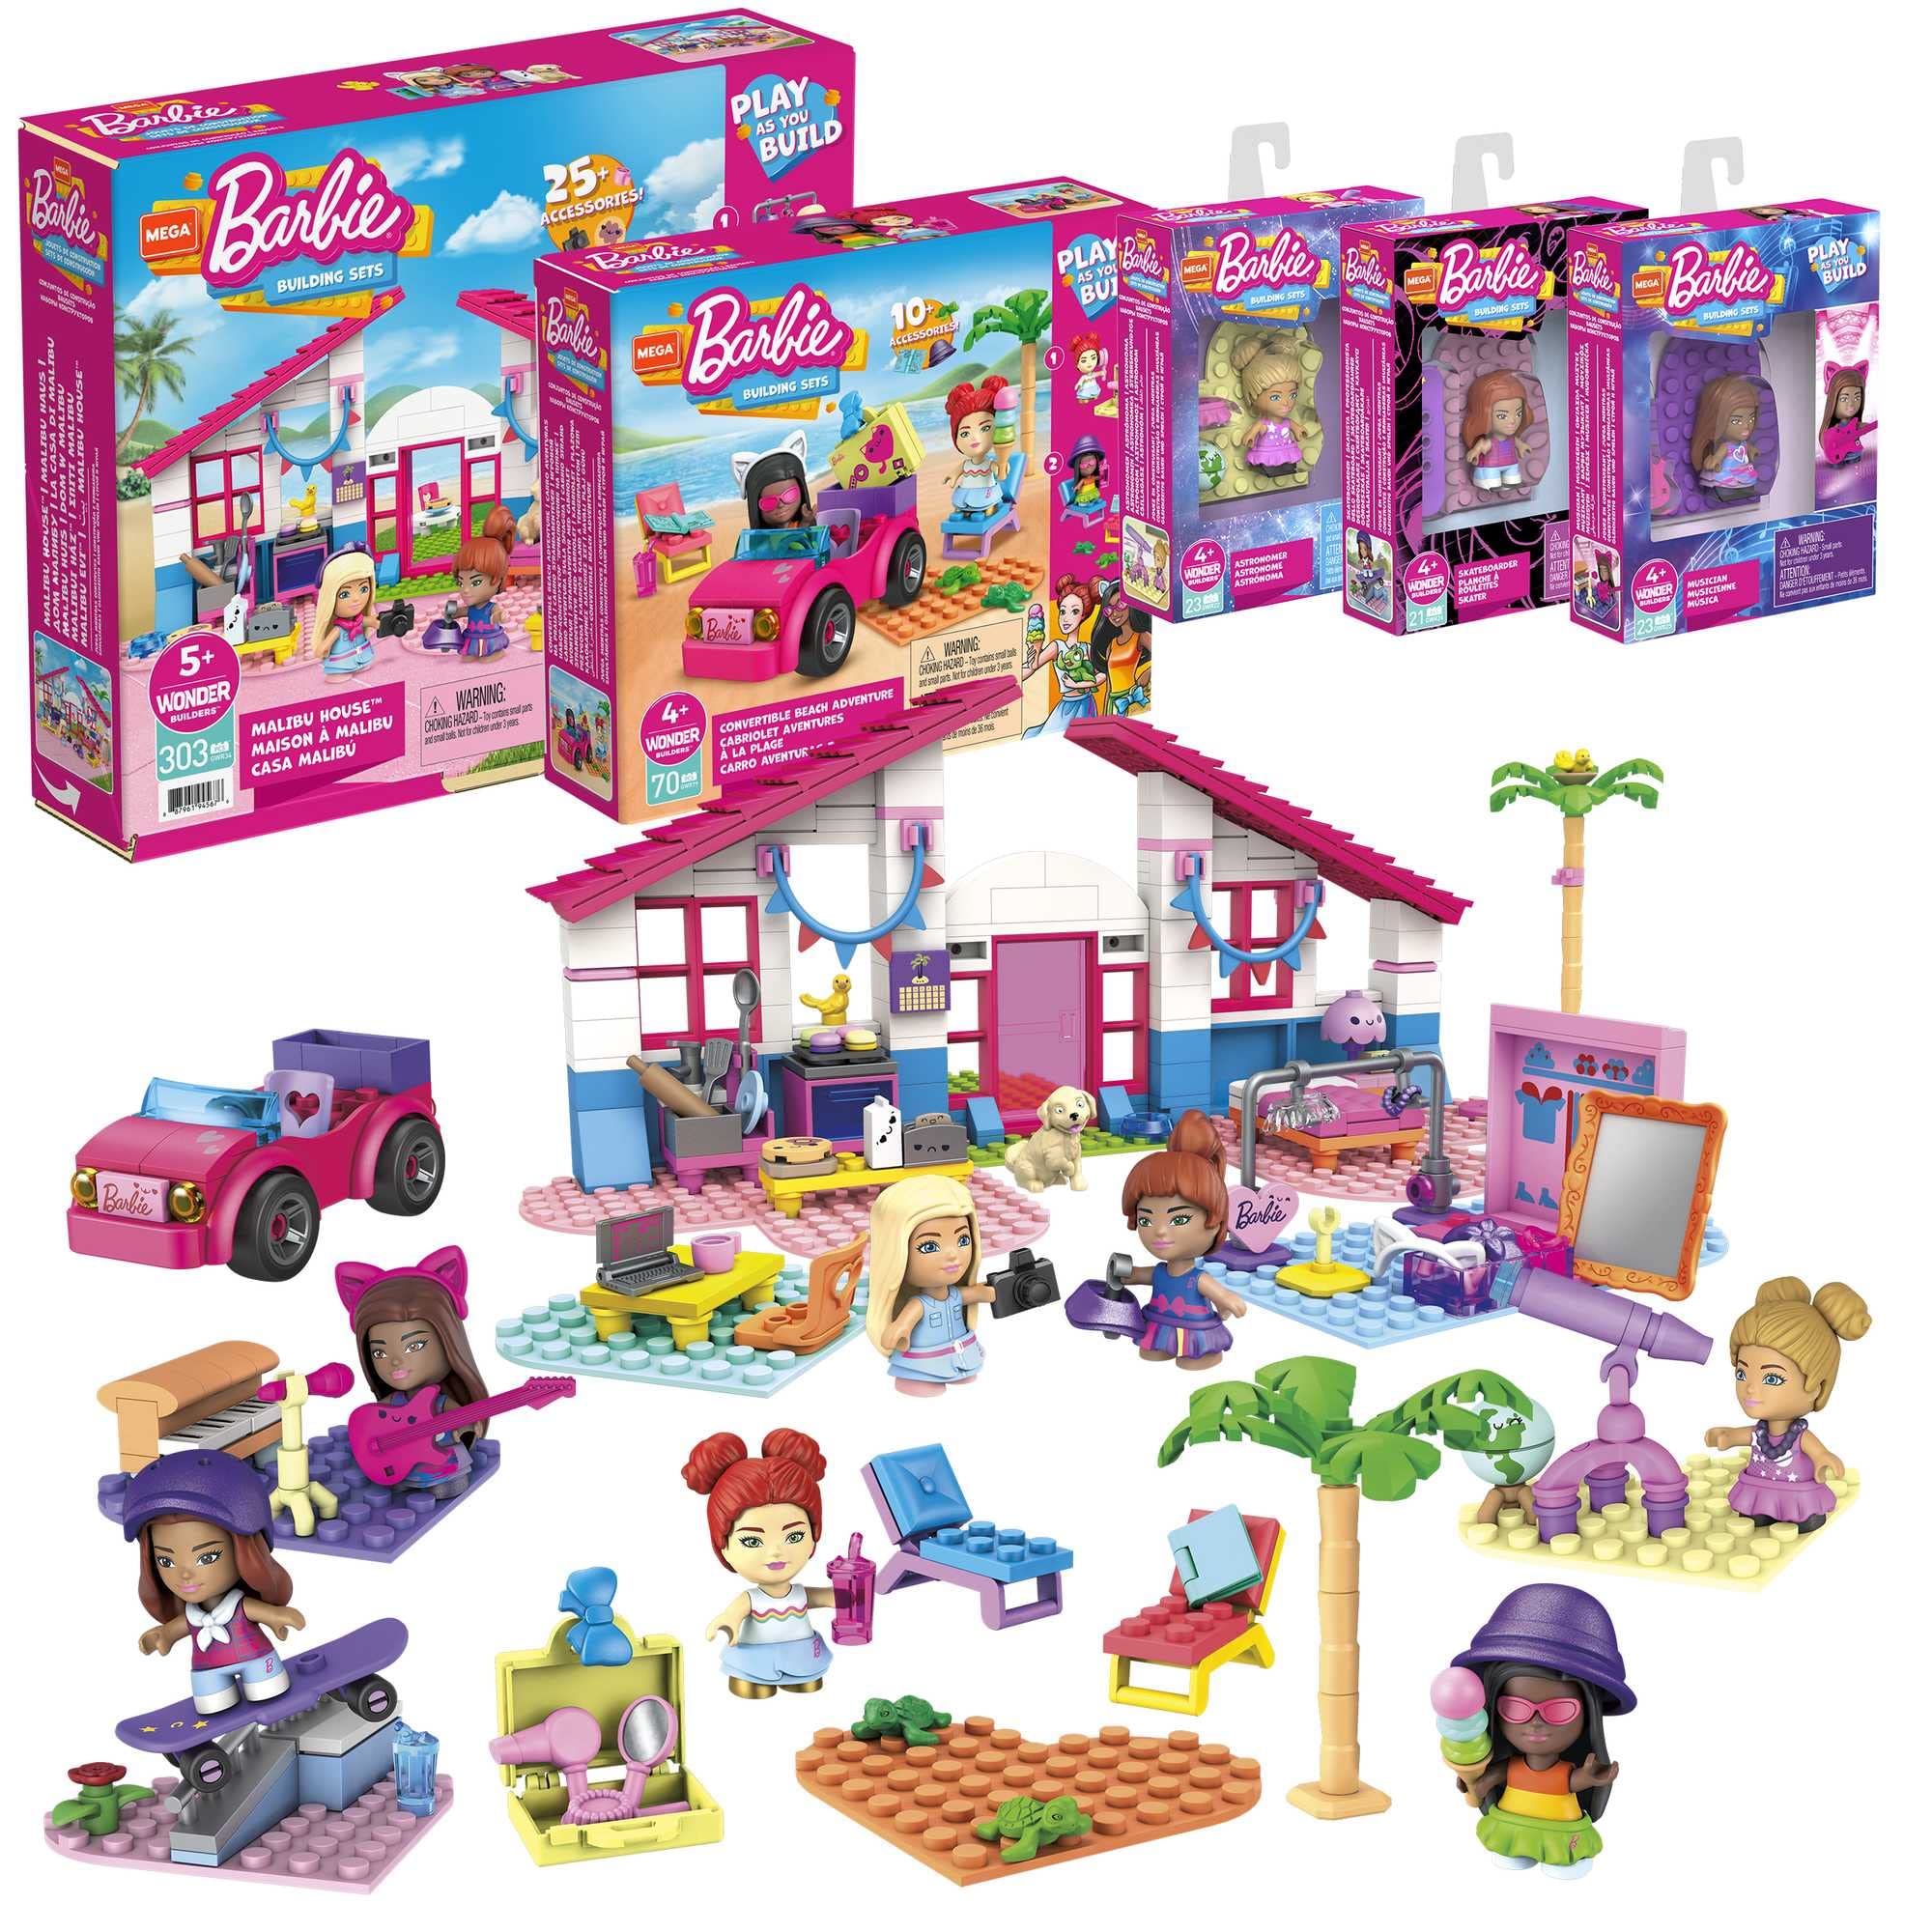 Mega Barbie Malibu Building Sets Bundle, 440 Bricks And Pieces With Fashion And Roleplay Accessories, 7 Micro-Dolls, 1 Puppy, 2